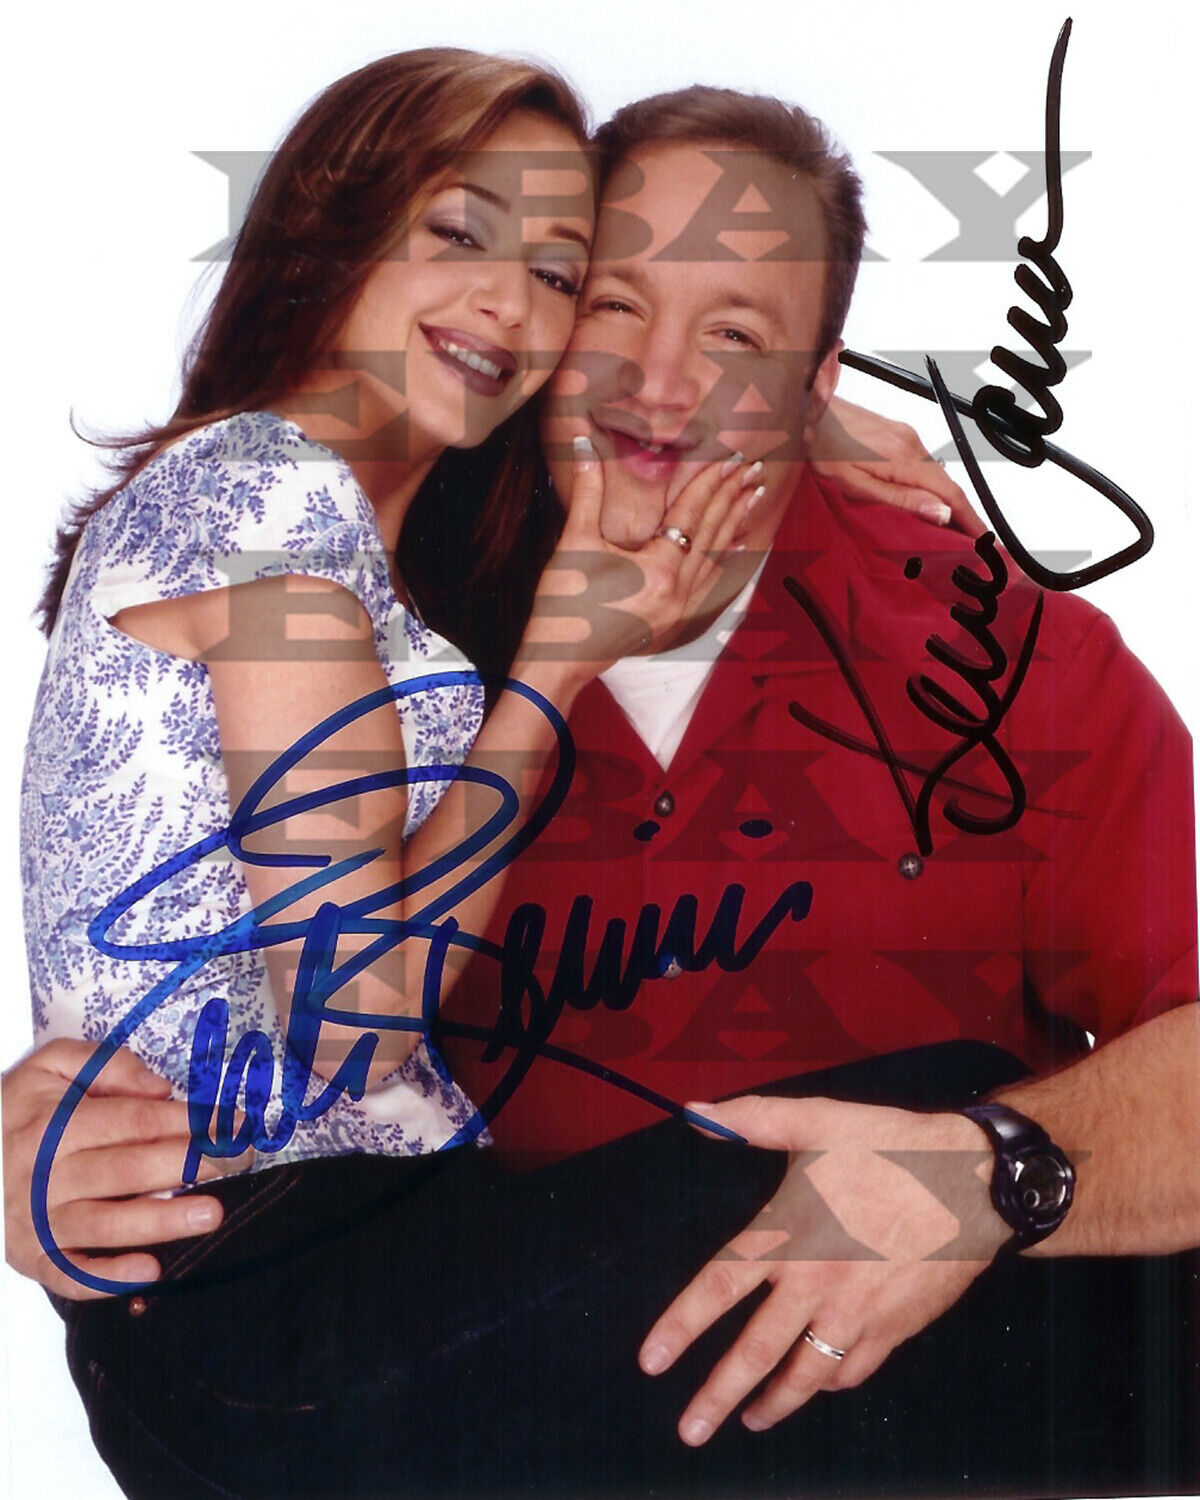 Kevin James & Lieh Rhemini Autographed Signed 8x10 Photo Poster painting Reprint